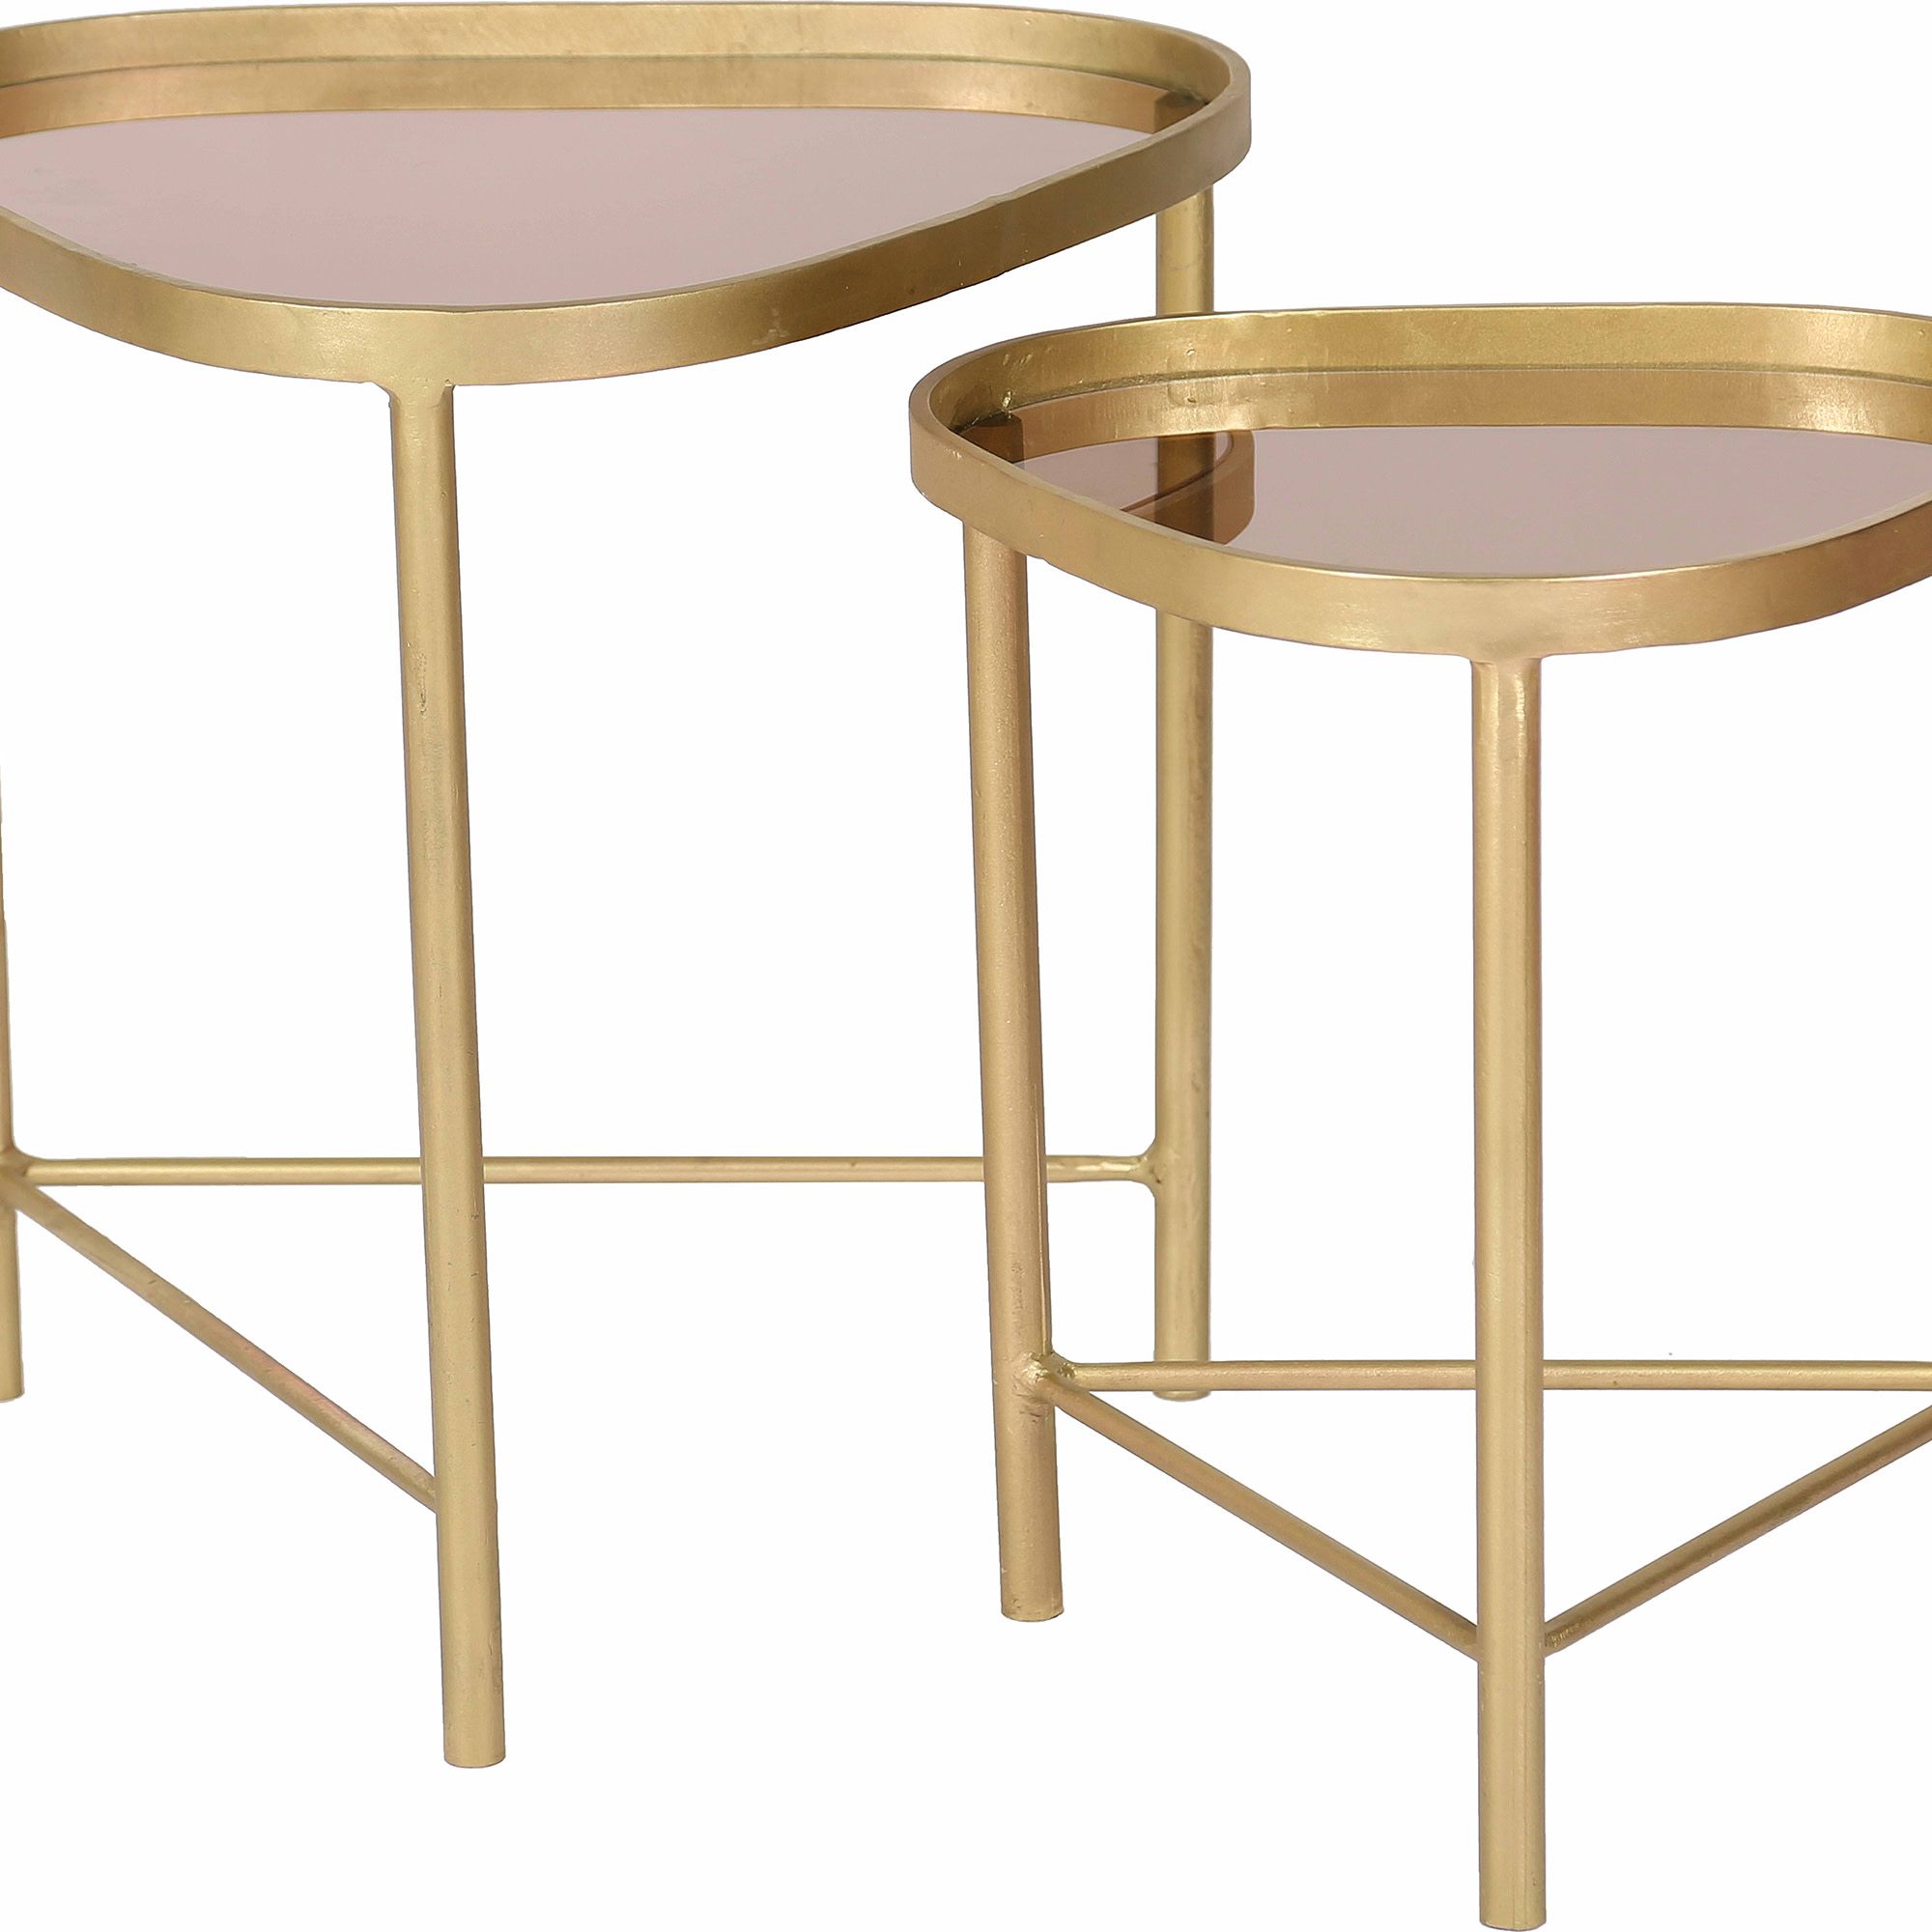 Ren Wil Ta267 Comete Set Of 2 – Modern Iron Accent Tables – Brass | Ebay With Triangular Indoor Outdoor Nesting Tables (View 1 of 15)